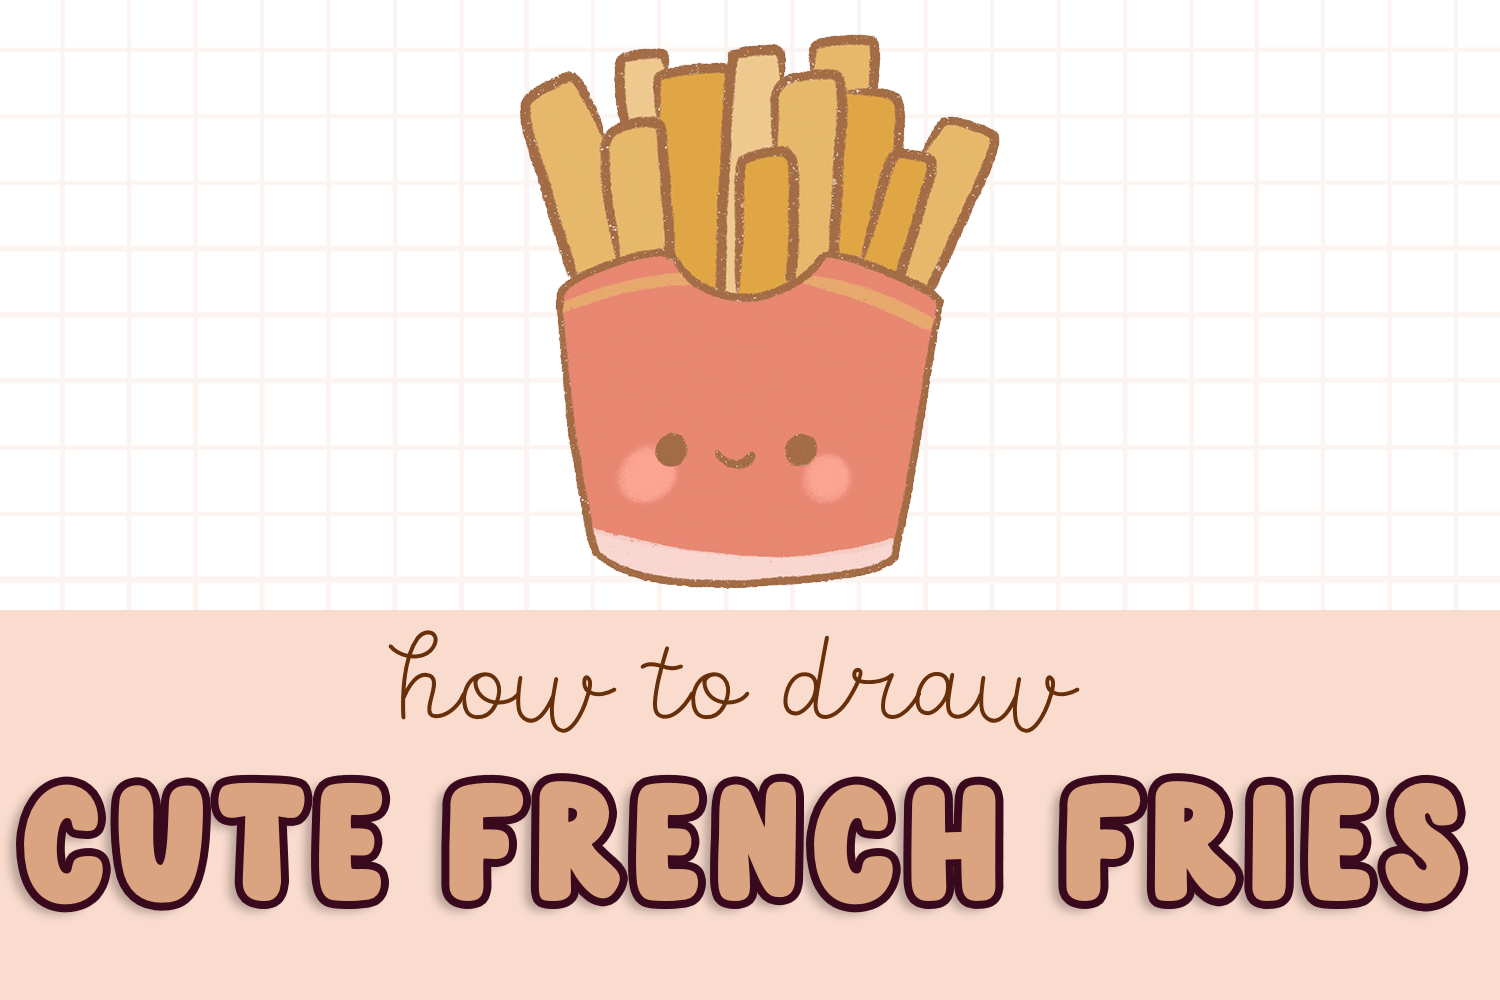 8,904 Retro French Fries Images, Stock Photos & Vectors | Shutterstock